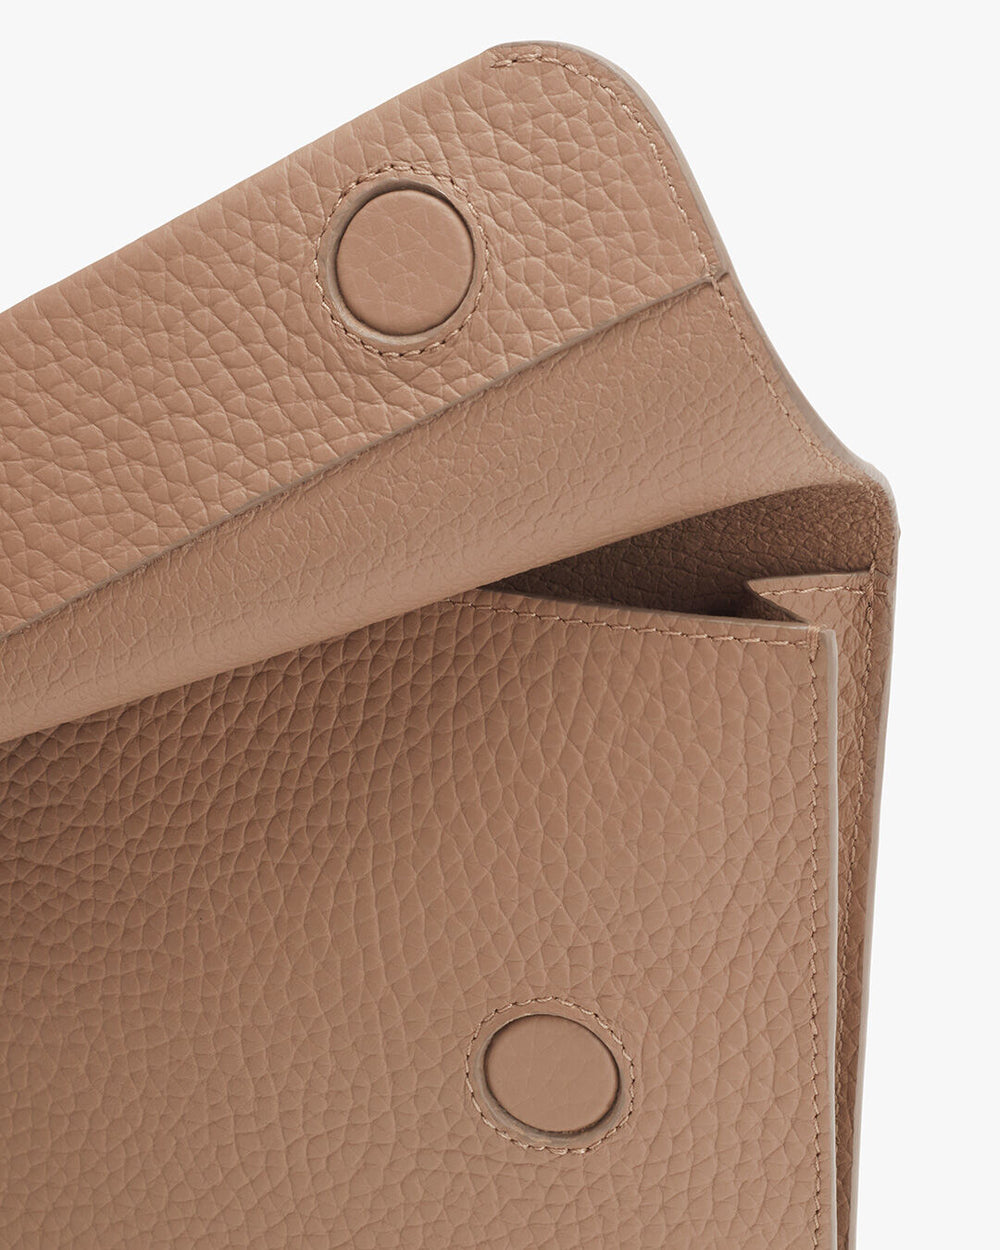 Close-up view of a textured handbag with flap closure and snap buttons.